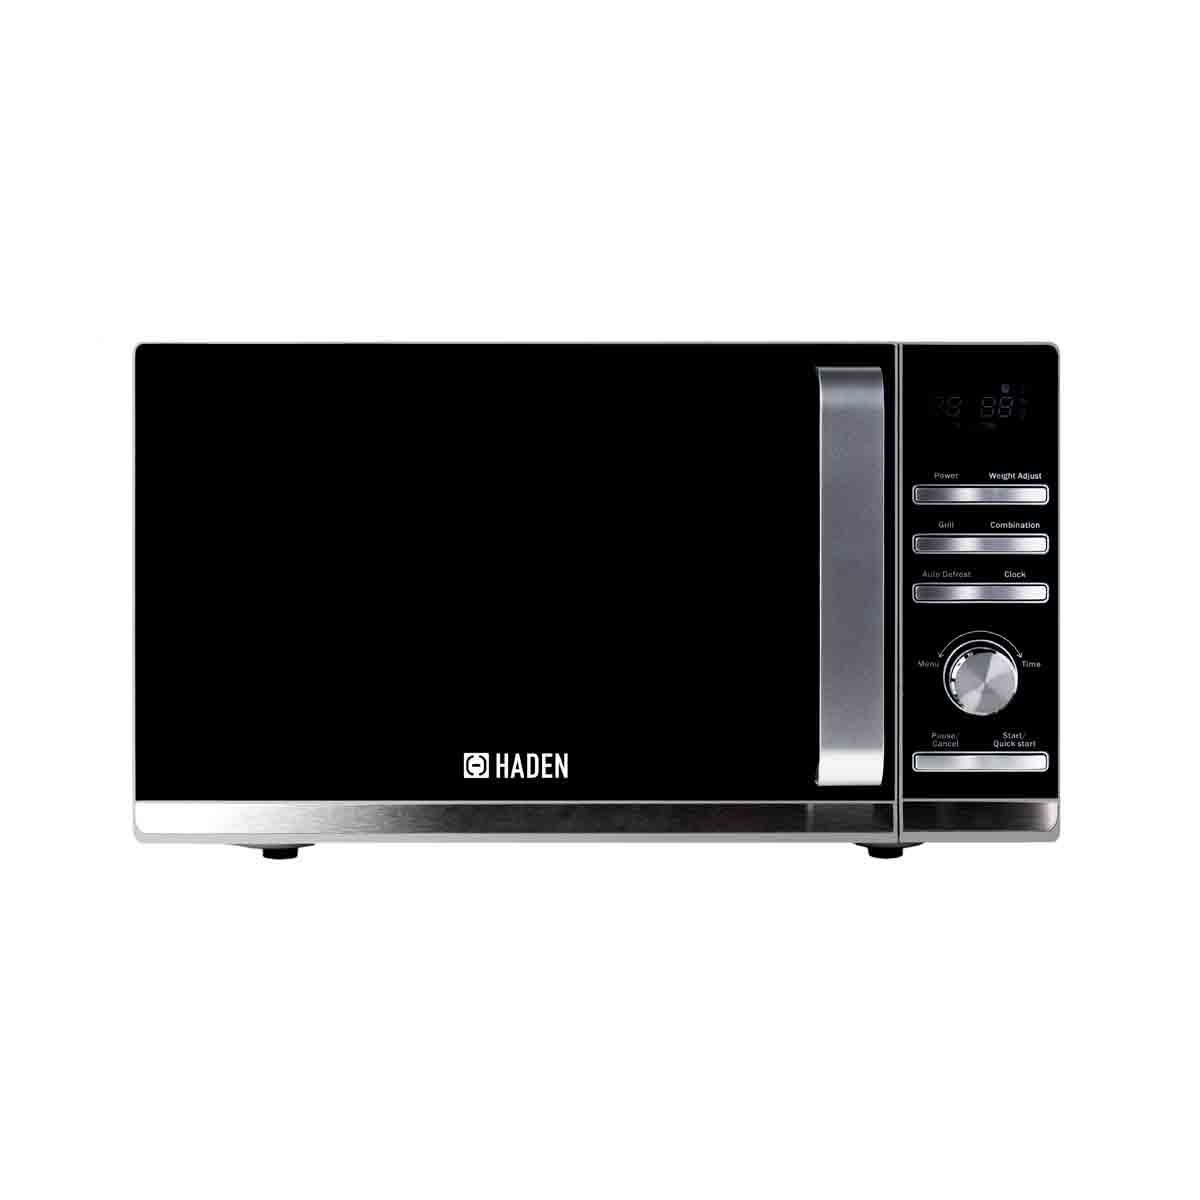 Haden 199096 20L 800W Silver Microwave With Grill